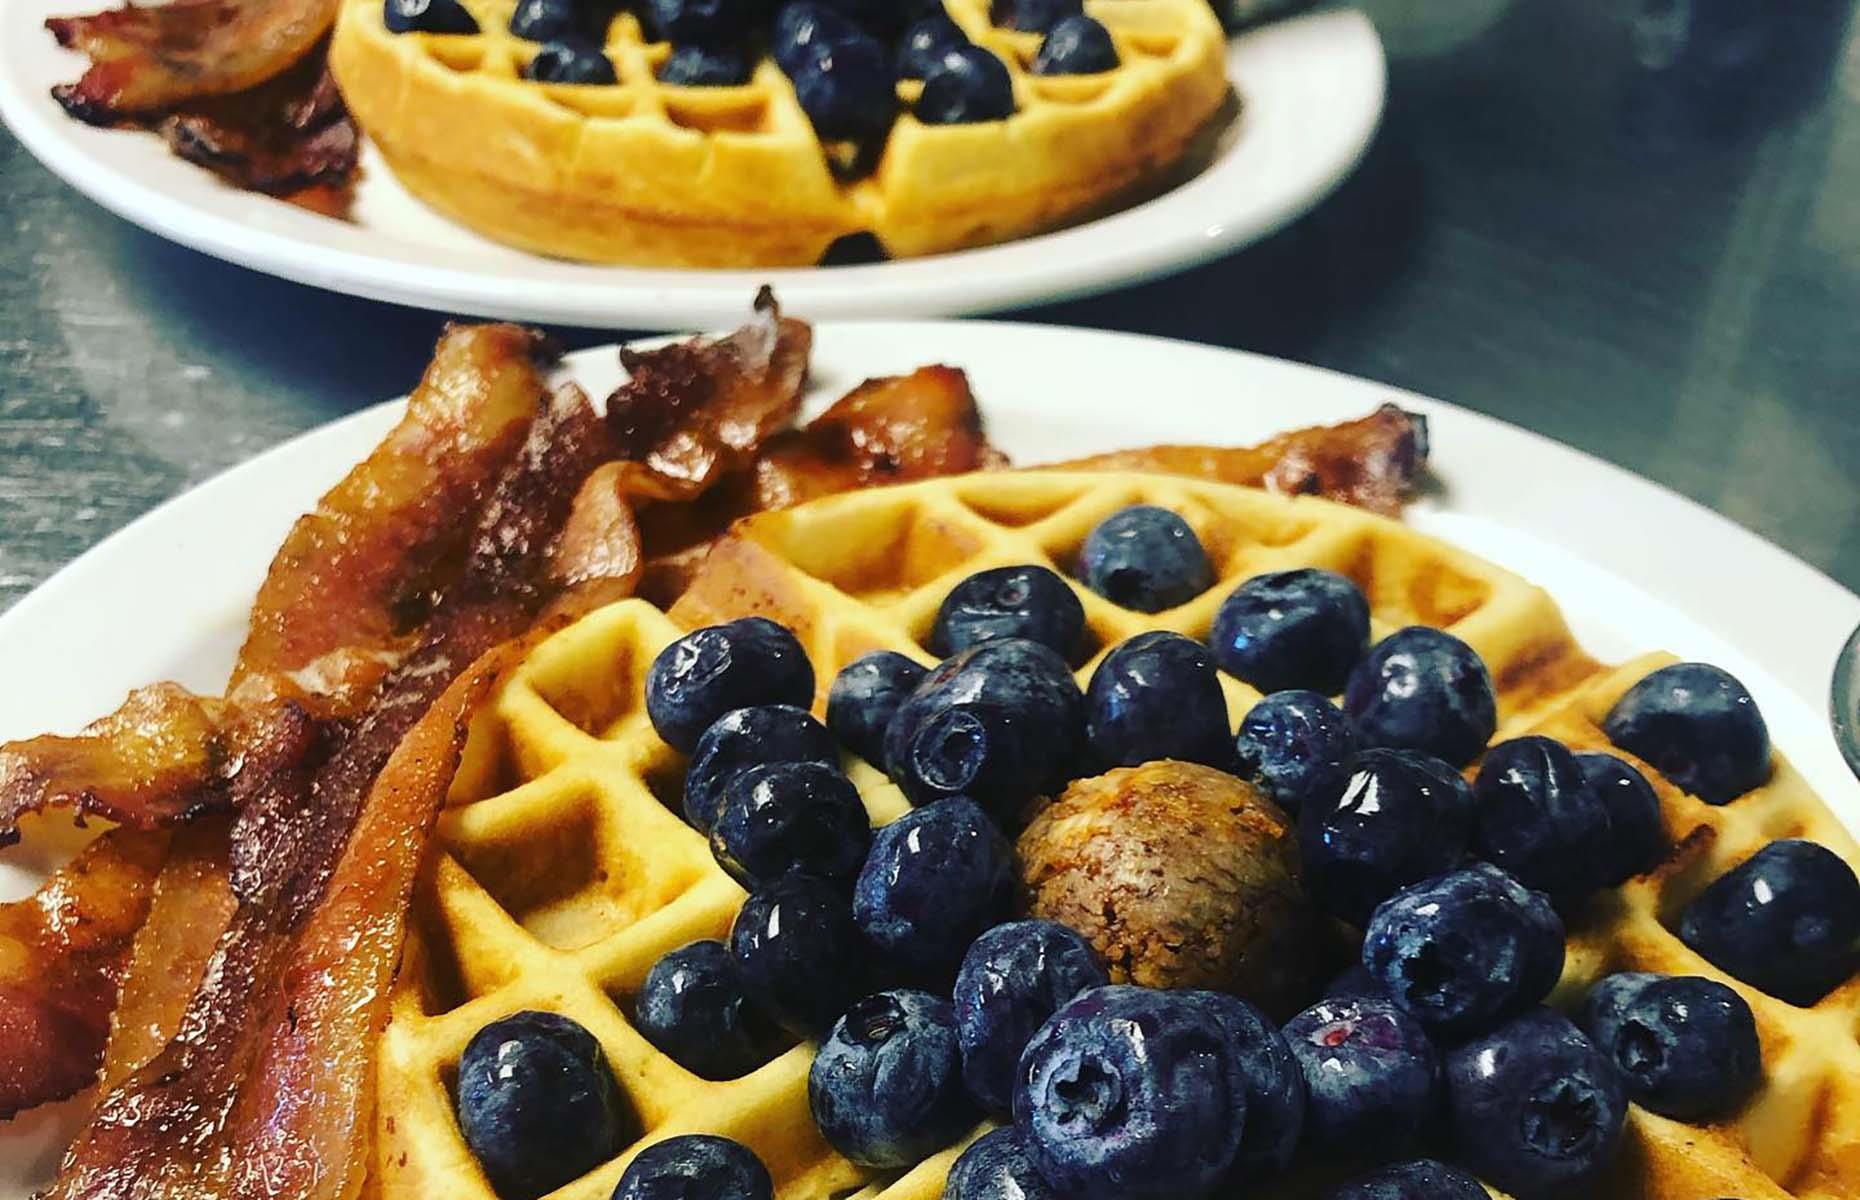 <p>Opened by Lori and Jeffrey Withrow in 2018, <a href="https://www.woodironeatery.com/">Wood Iron Eatery</a> is an adorable café serving great waffles with myriad toppings, from honeycomb butter to bacon and aged Cheddar, and a crispy chicken sandwich with sriracha and pickles that puts Chick-fil-A to shame. The coffee here is also exceptional and goes extremely well with a slice of the <a href="https://www.yelp.com/biz/wood-iron-eatery-fayetteville-2">"best vanilla pound cake on Earth"</a>.</p>